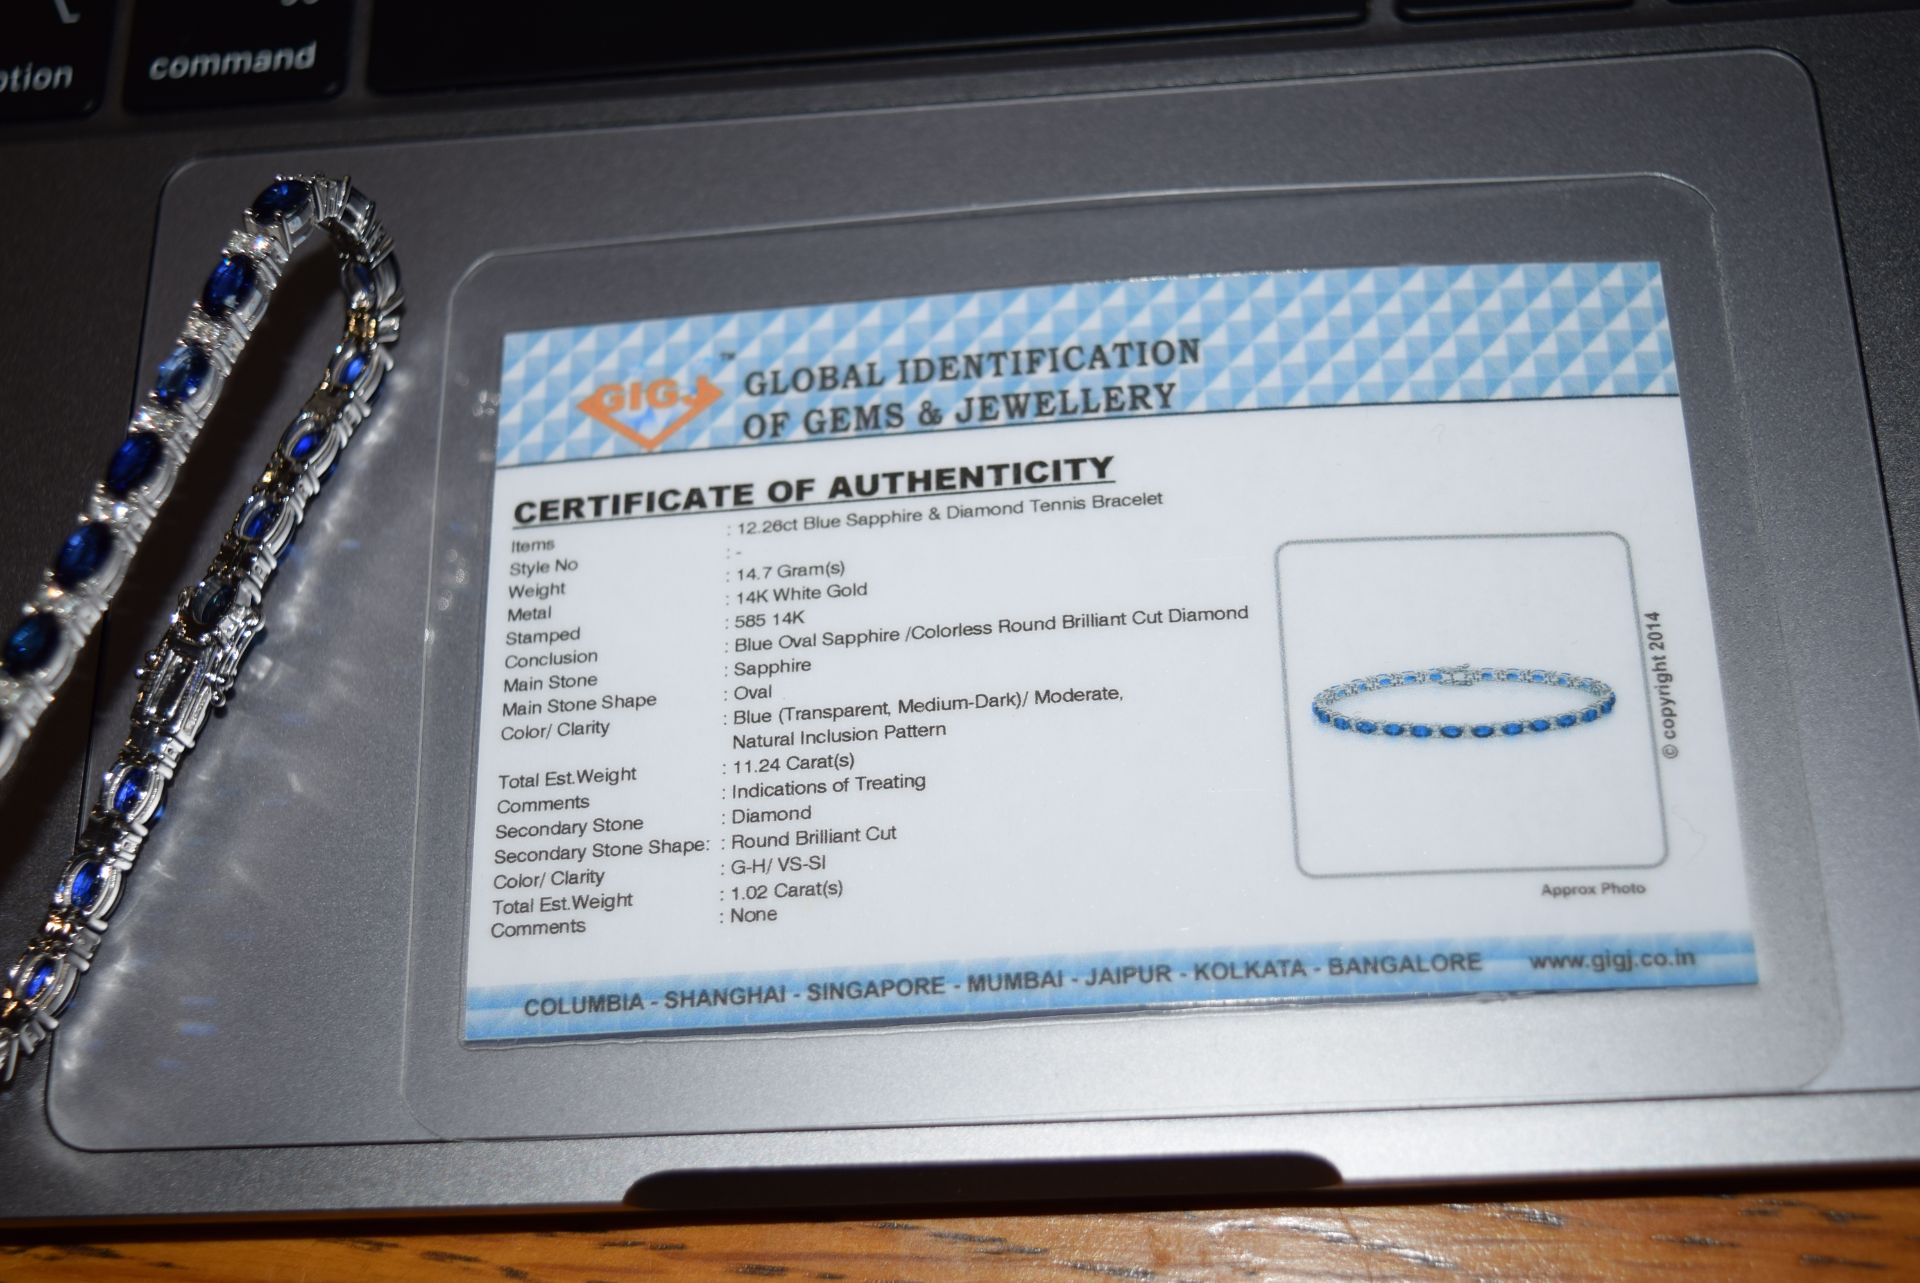 12.26CT BLUE SAPPHIRE & DIAMOND TENNIS BRACELET IN WHITE GOLD WITH BOX & CERTIFICATE CARD - Image 5 of 6